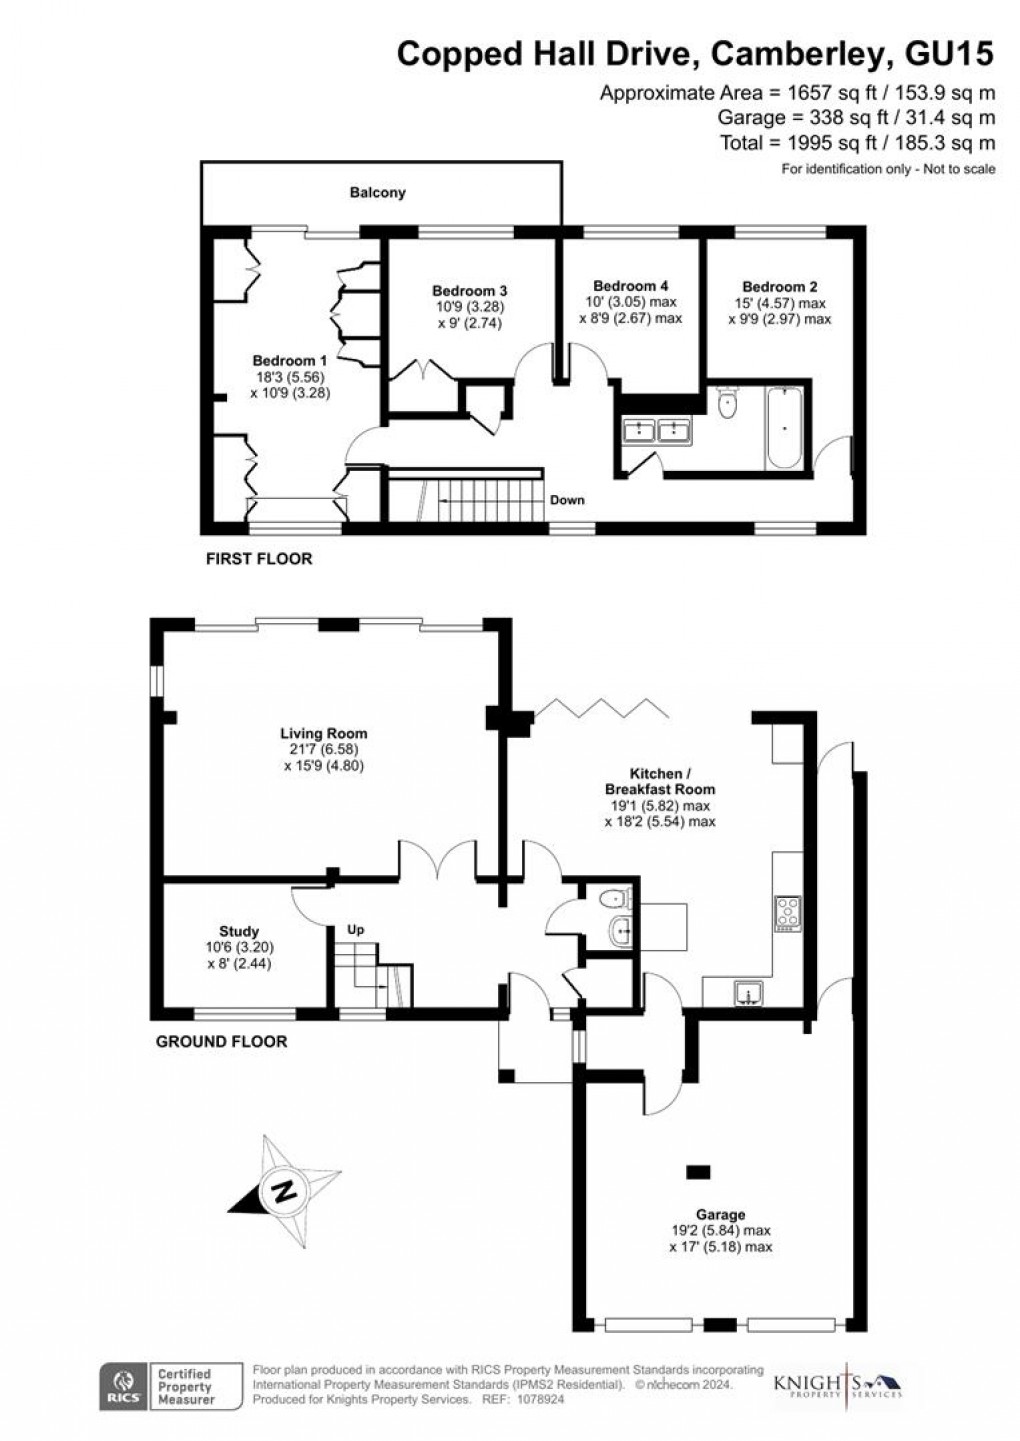 Floorplan for Copped Hall Drive, Camberley